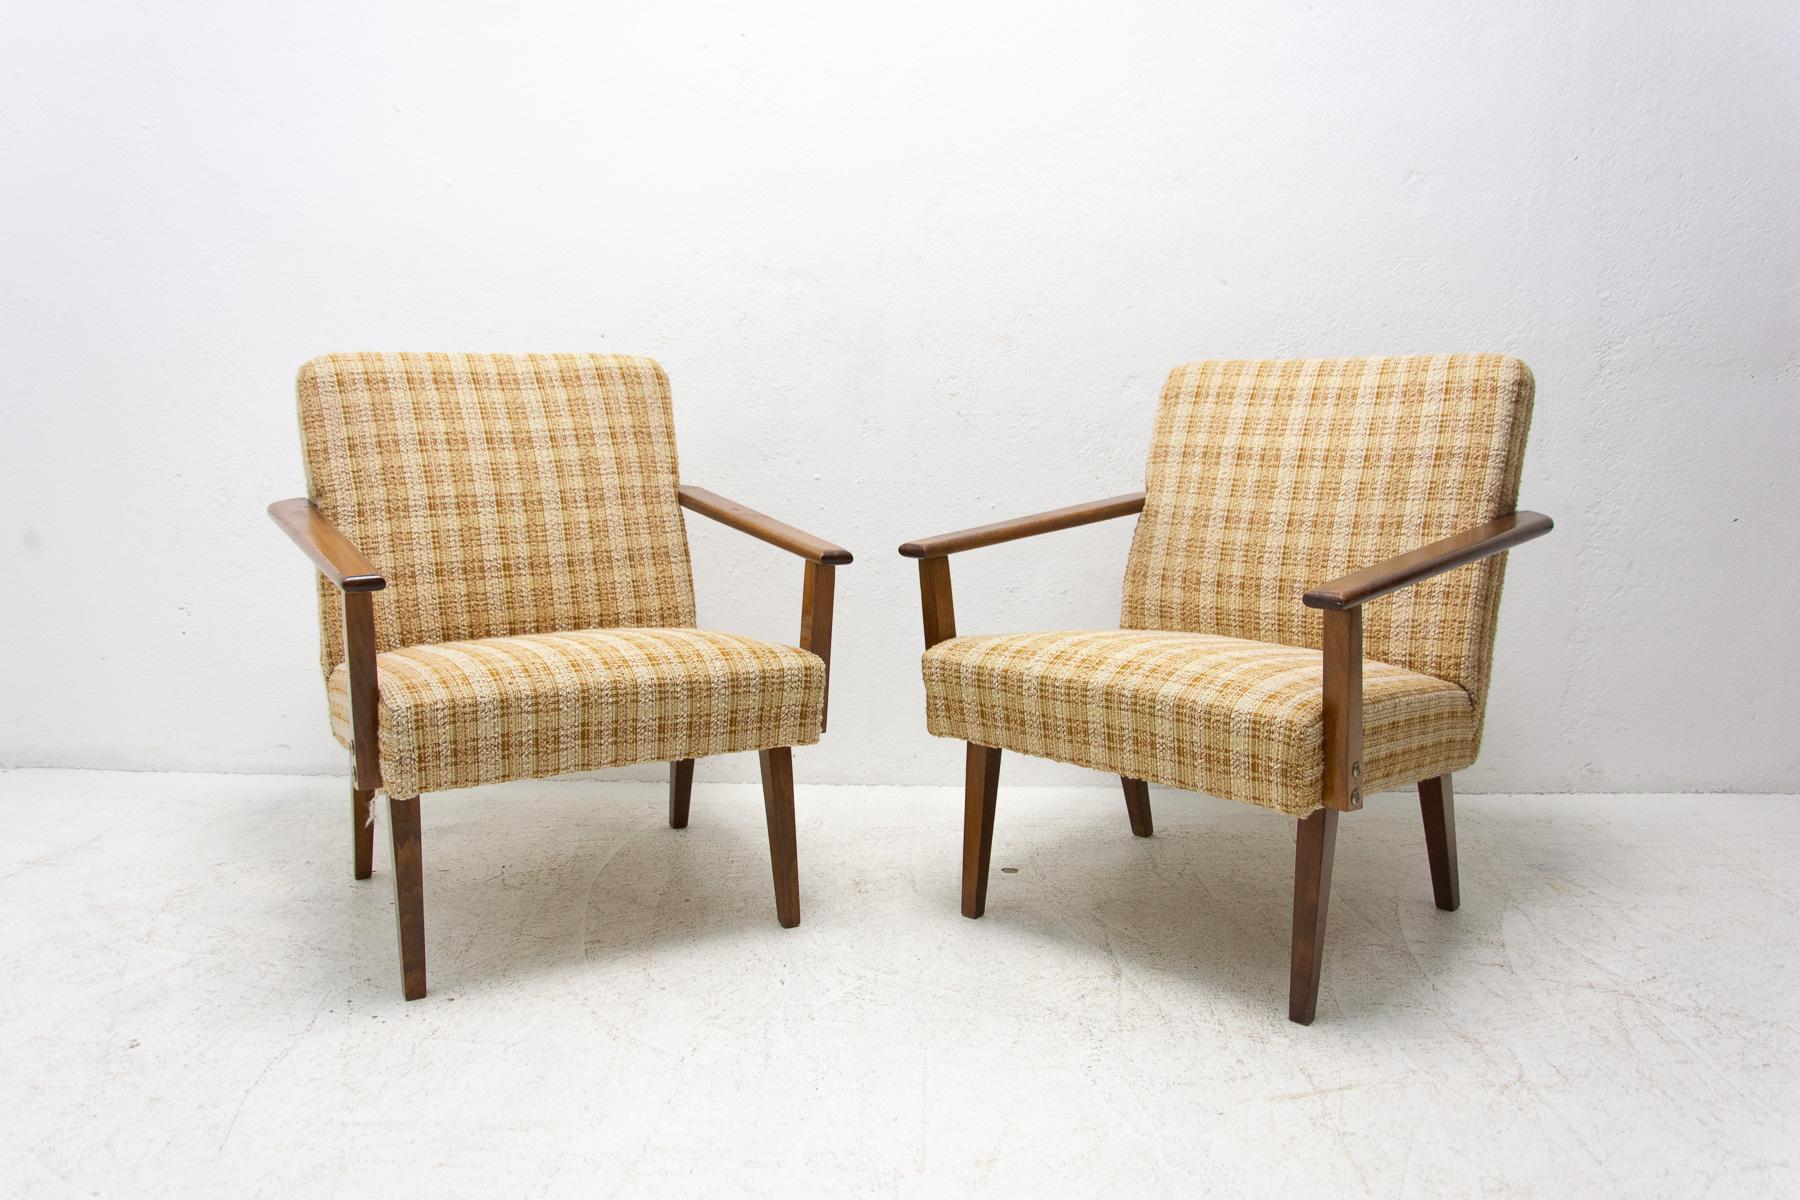 These Czechoslovak lounge chairs were made by Tatra Nabytok in the former Czechoslovakia in the 1960´s. Attribute to František Jirák.
The armchairs have the original structure of dark stained beech wood. They are in good Vintage condition, showing